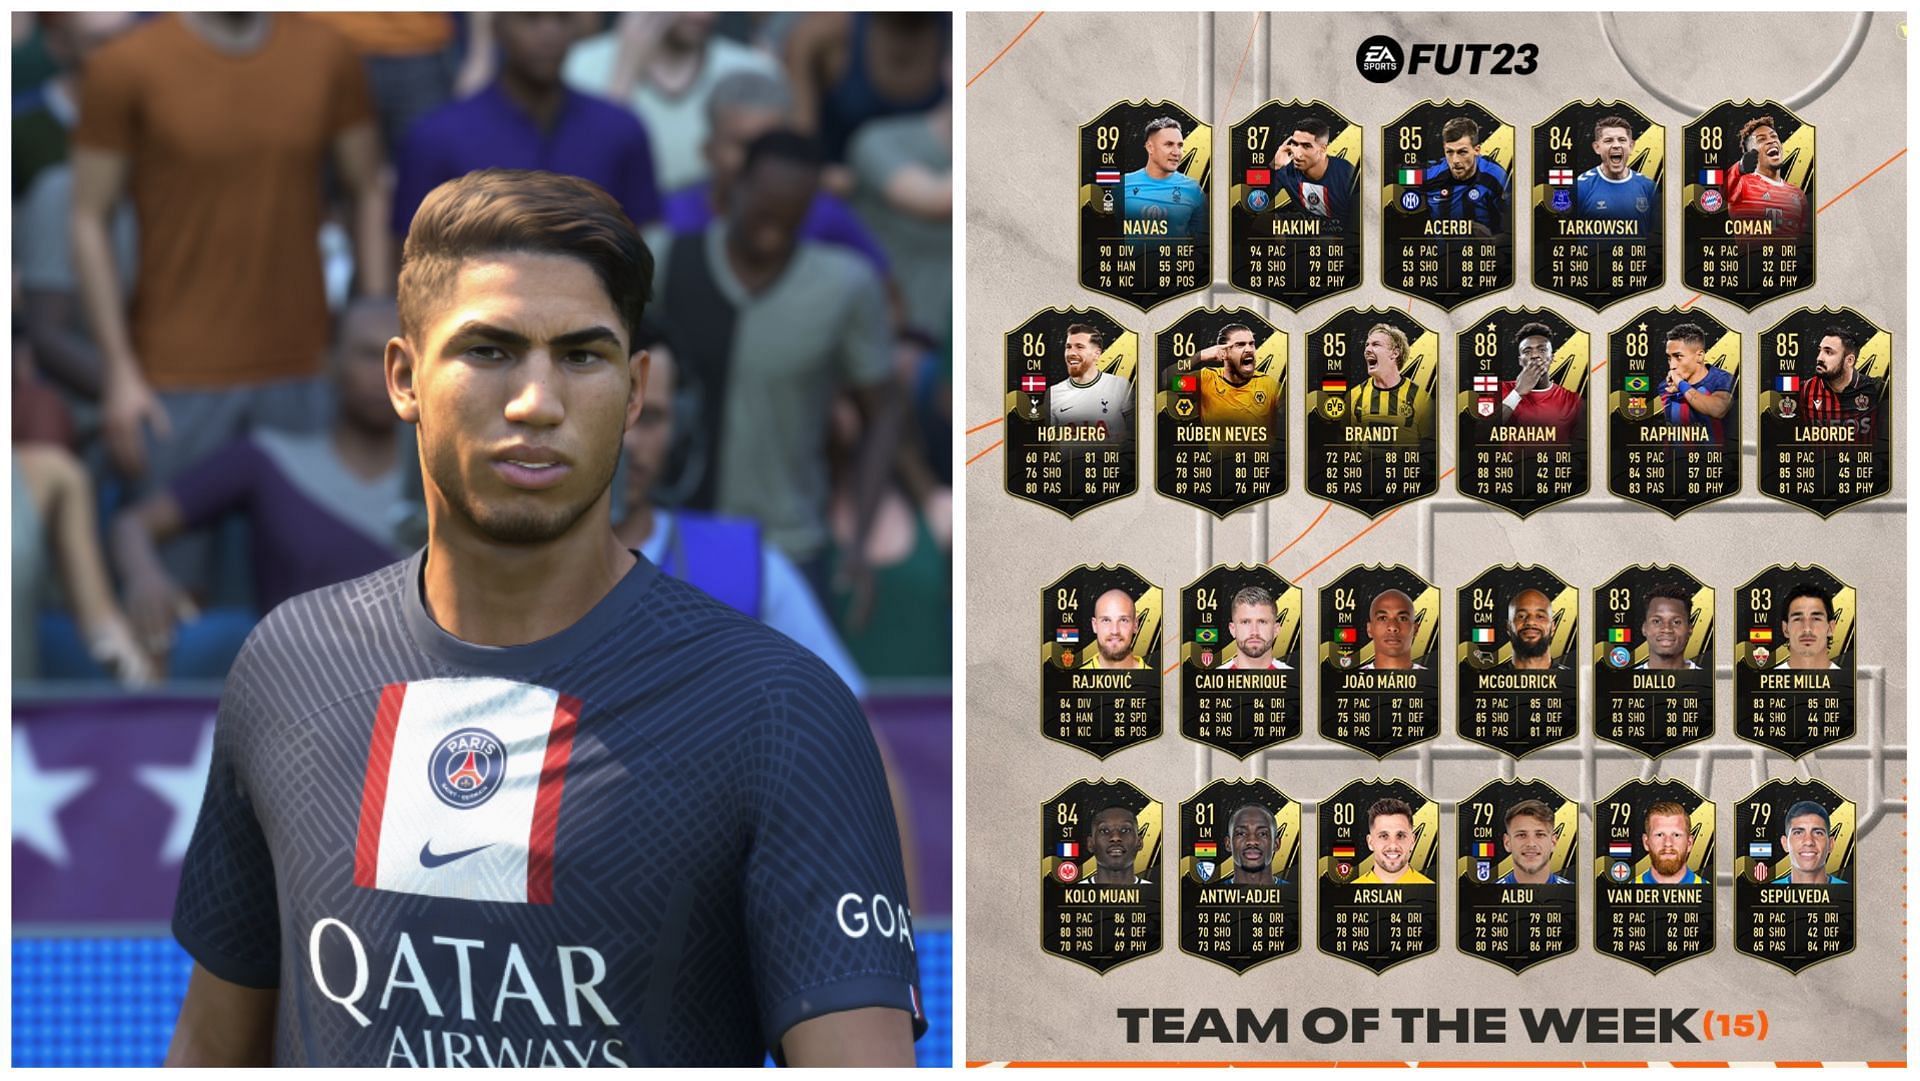 TOTW 15 is live in FIFA 23 (Images via EA Sports)